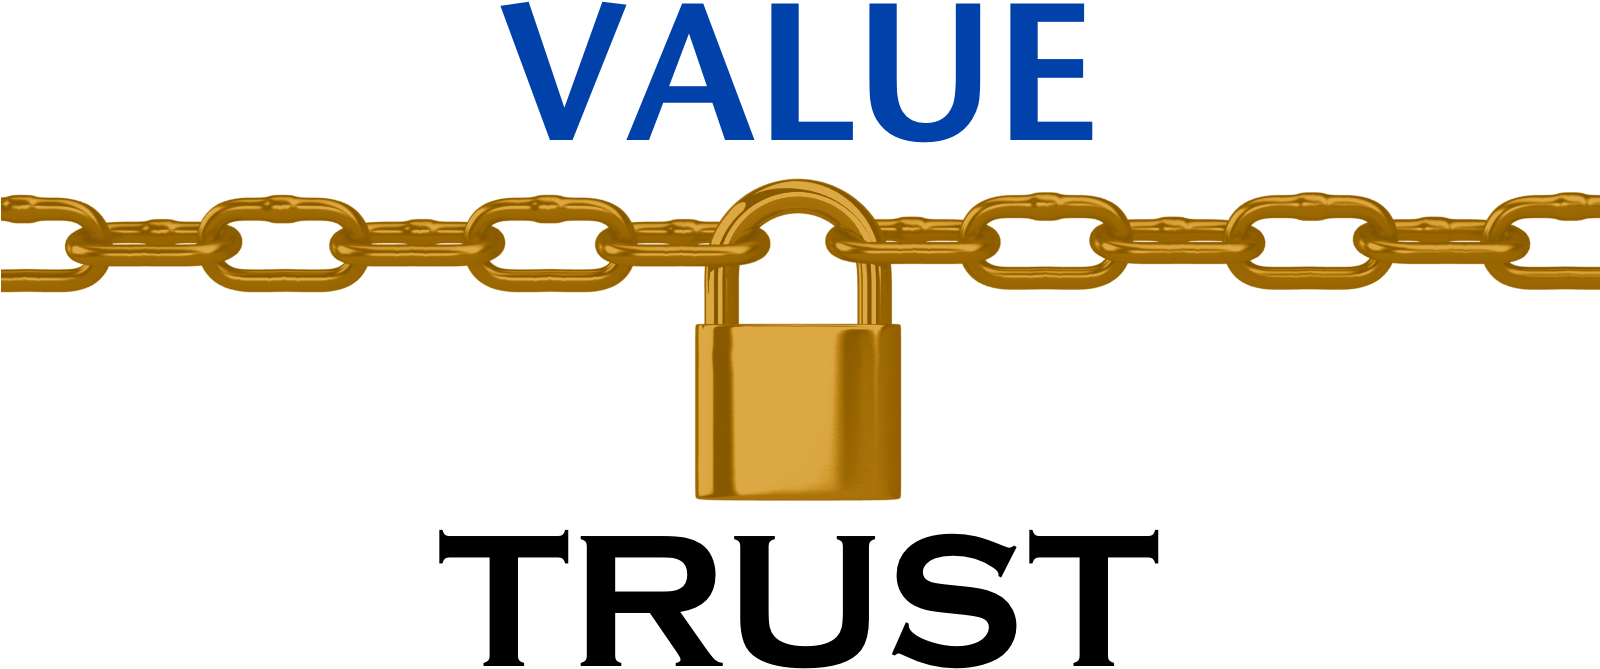 Value Trust Chain Lock Concept PNG image